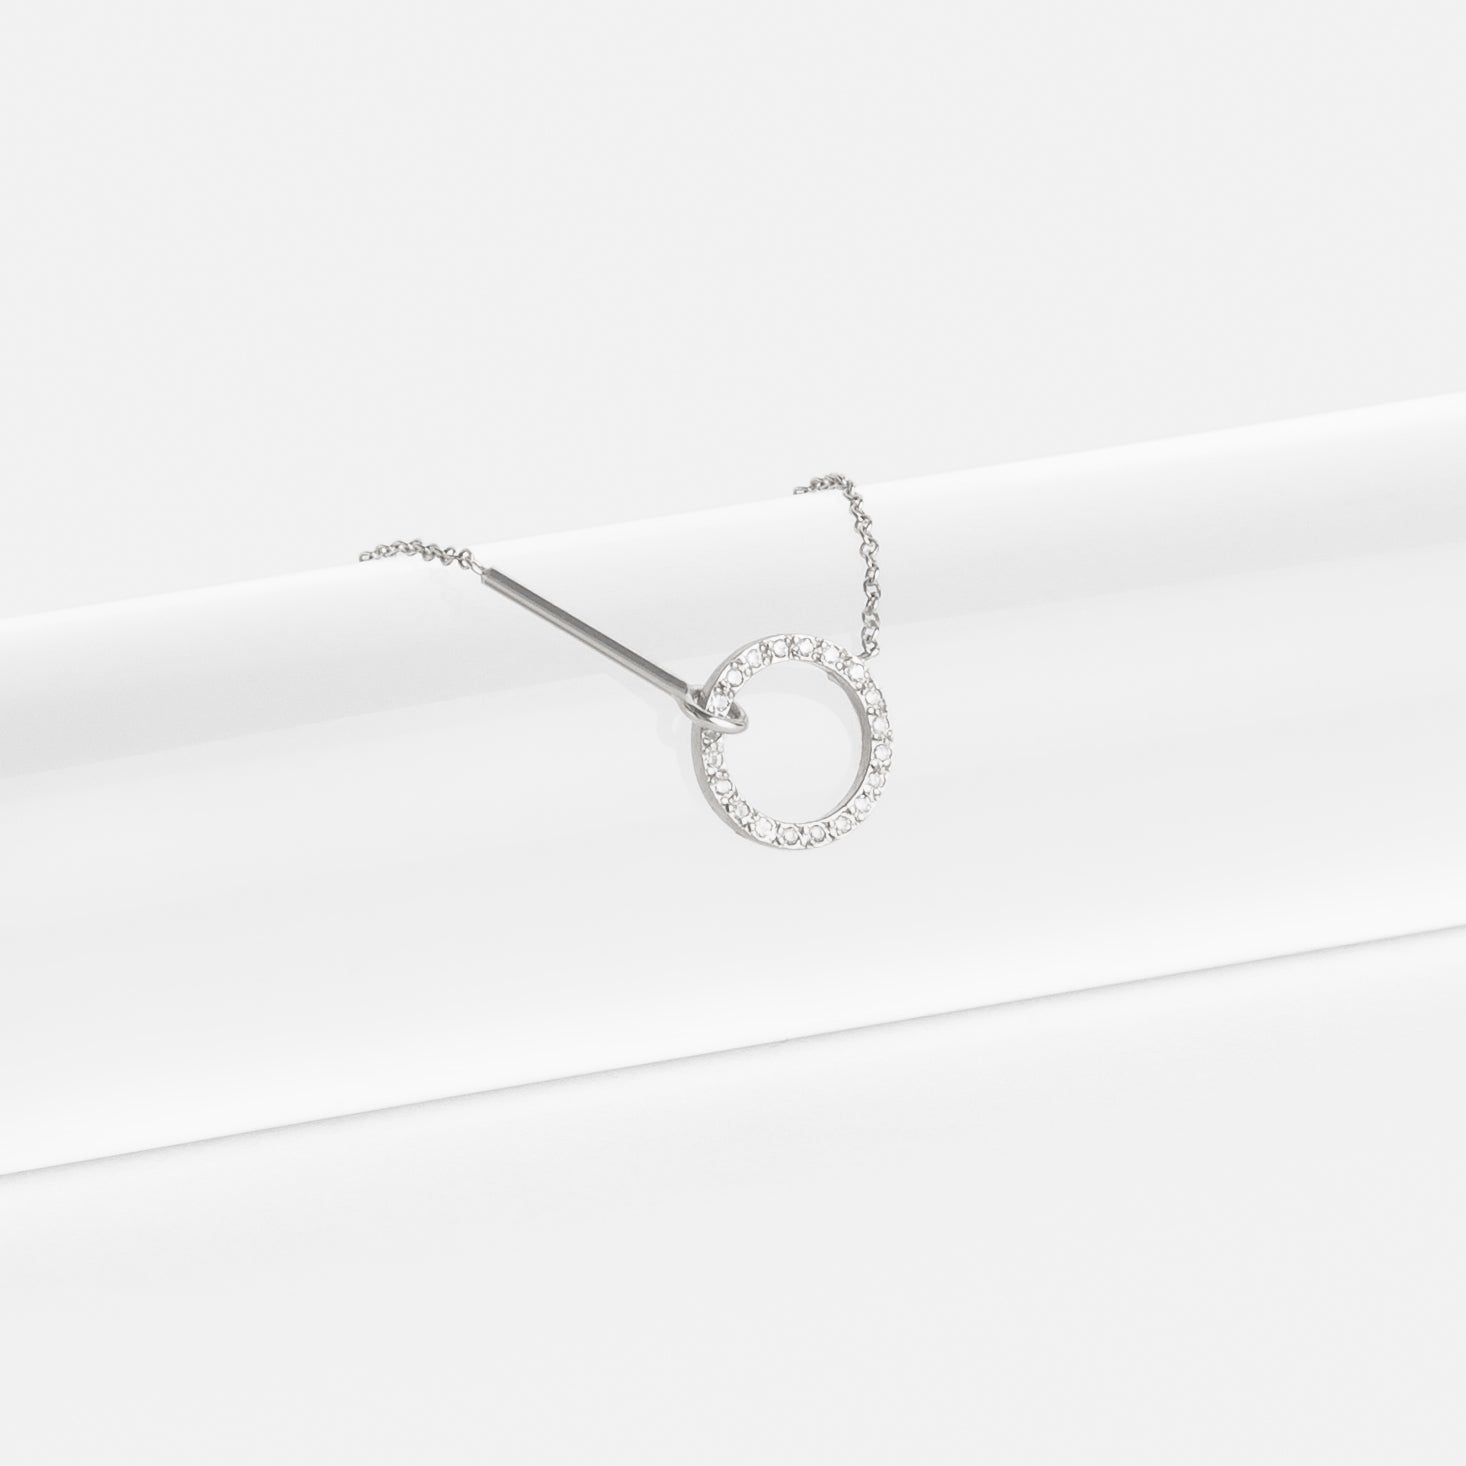 Visata Unconventional Necklace in 14k White Gold set with White Diamonds By SHW Fine Jewelry NYC